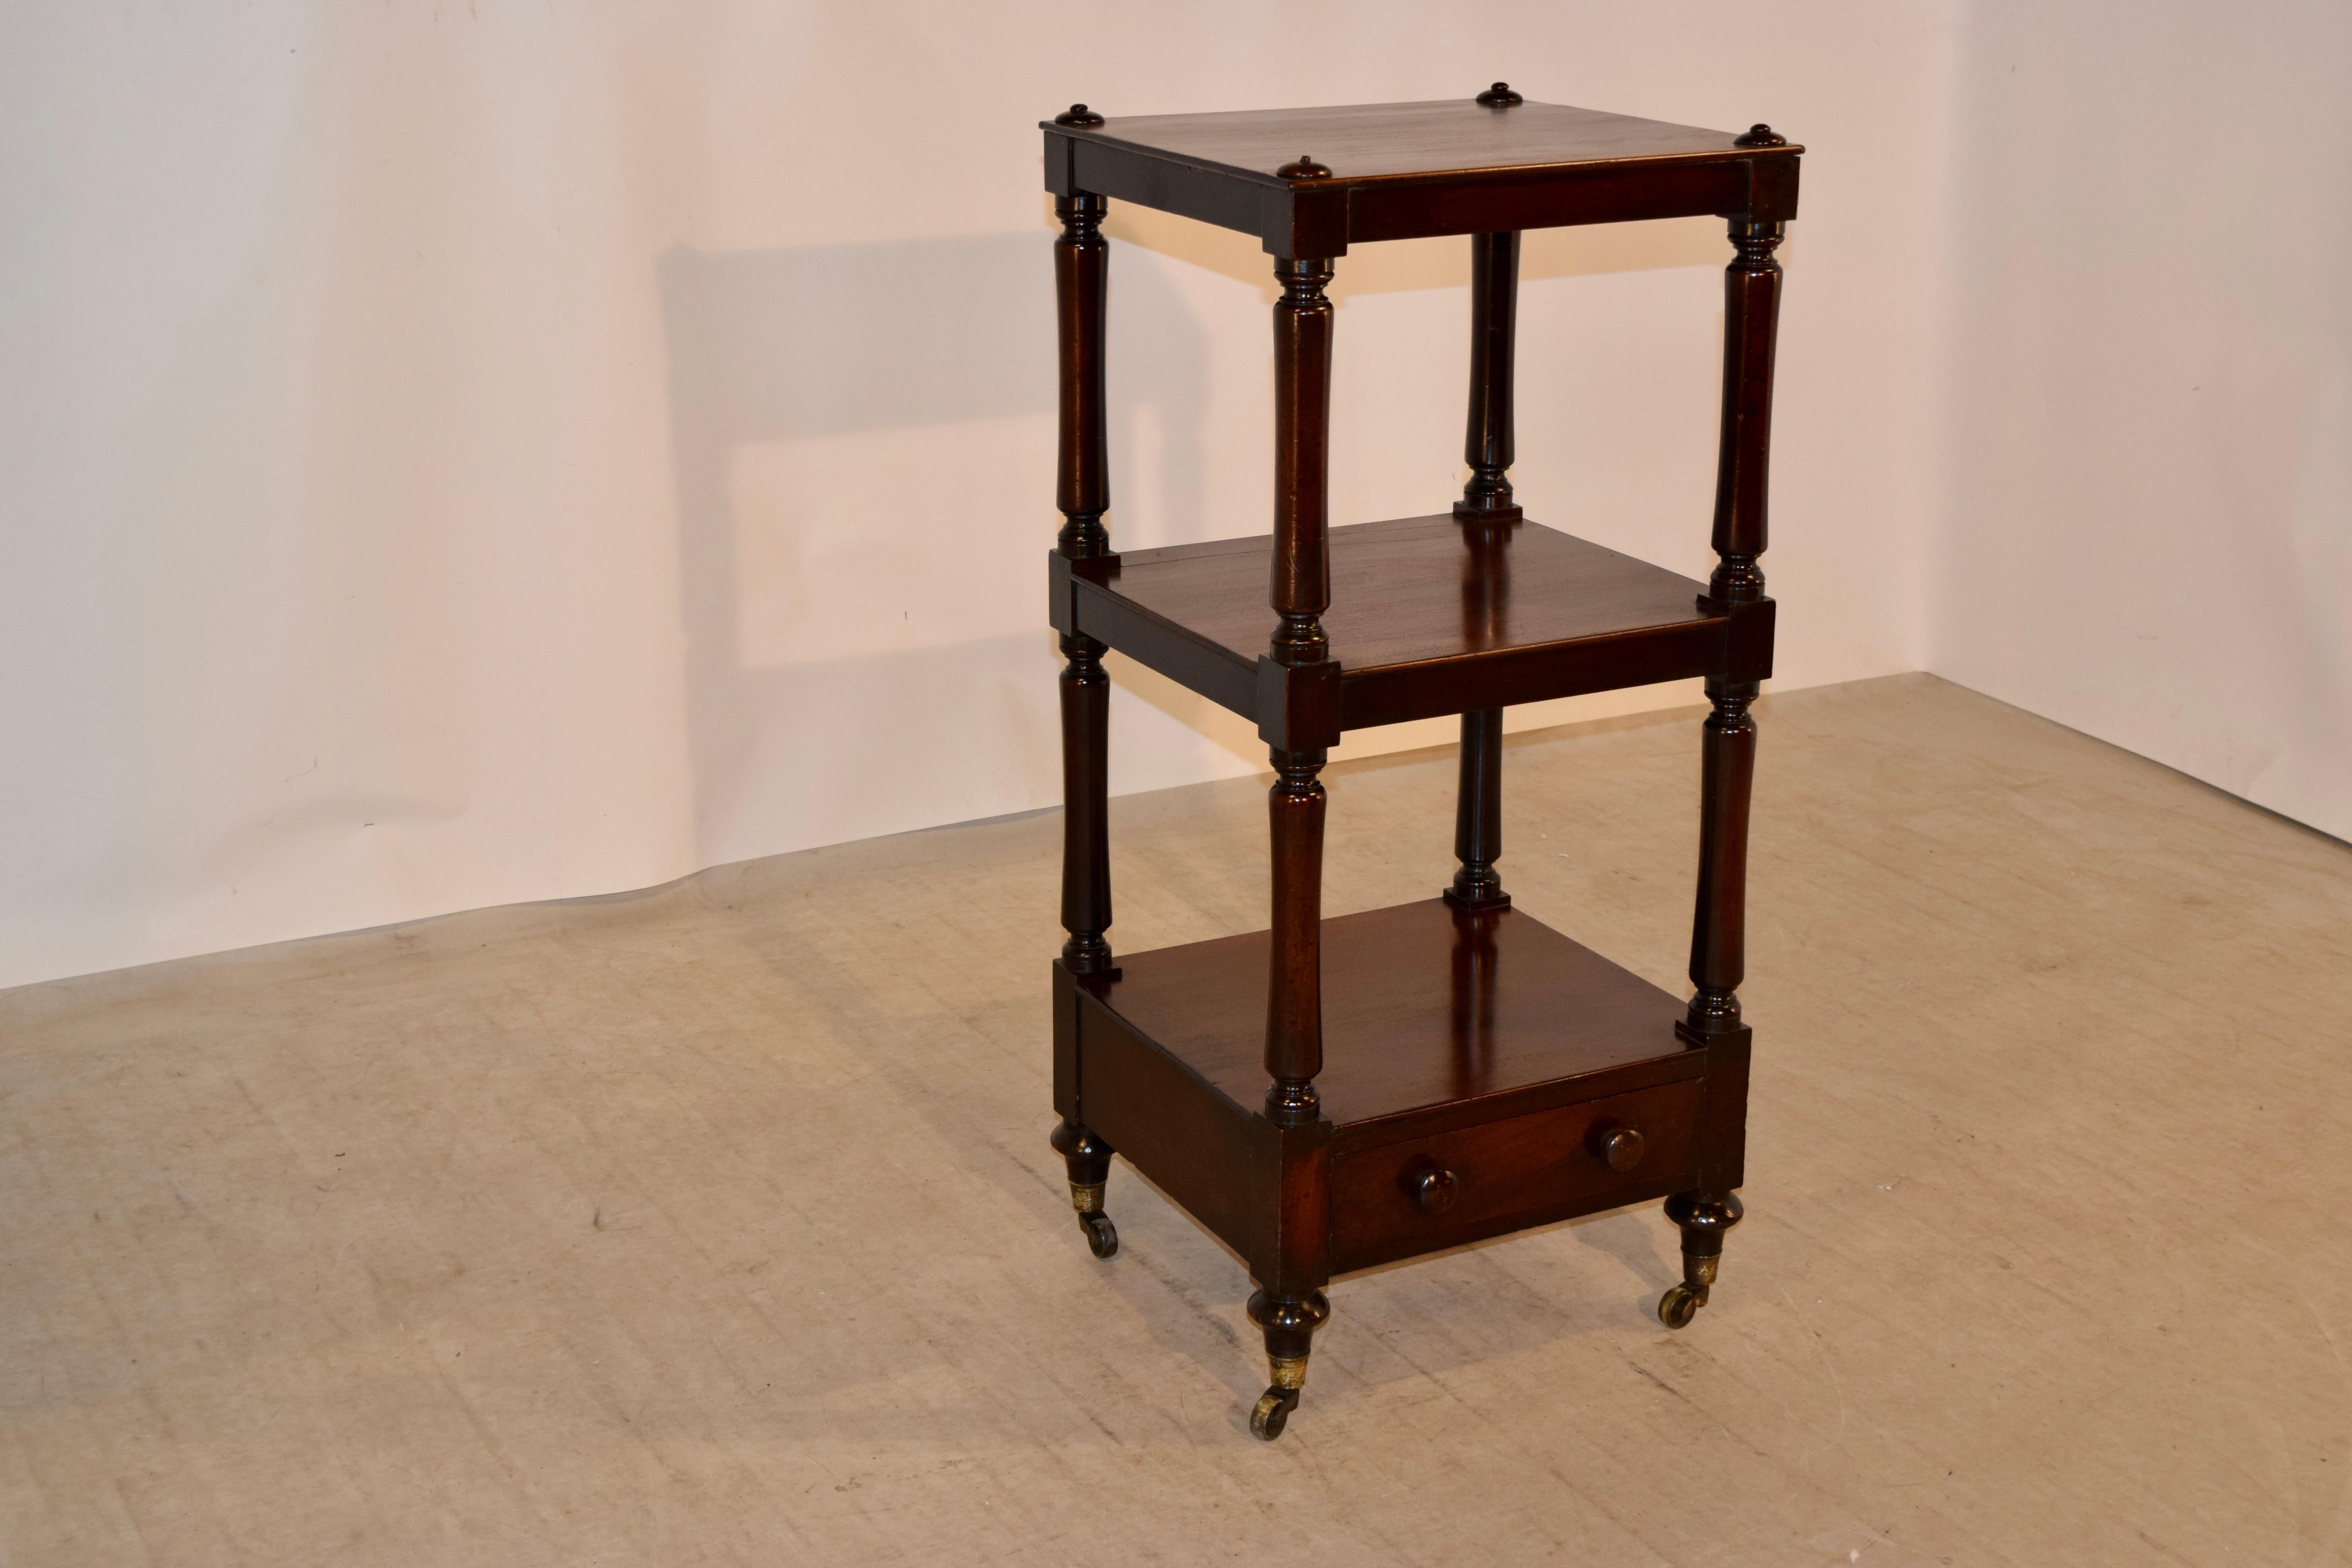 19th century English étagère made from mahogany. The top is decorated with hand turned caps over three shelves, separated by hand turned shelf supports. The lowest shelf contains a drawer and the piece is raised on hand cast brass casters.